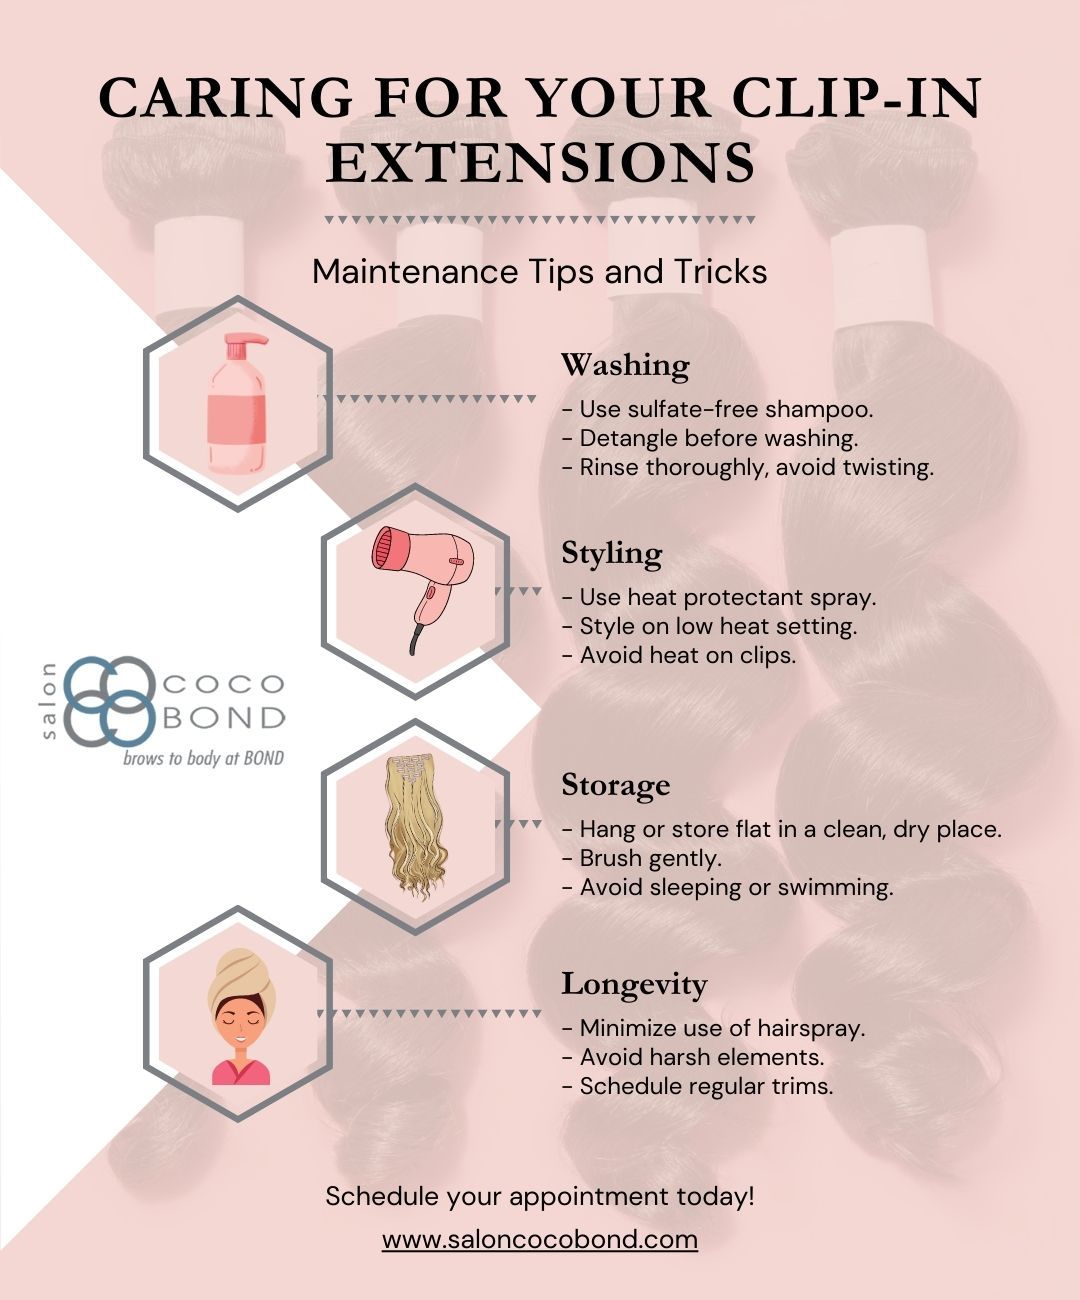 M35192 - Infographic - Caring for Your Clip-In Extensions.jpg